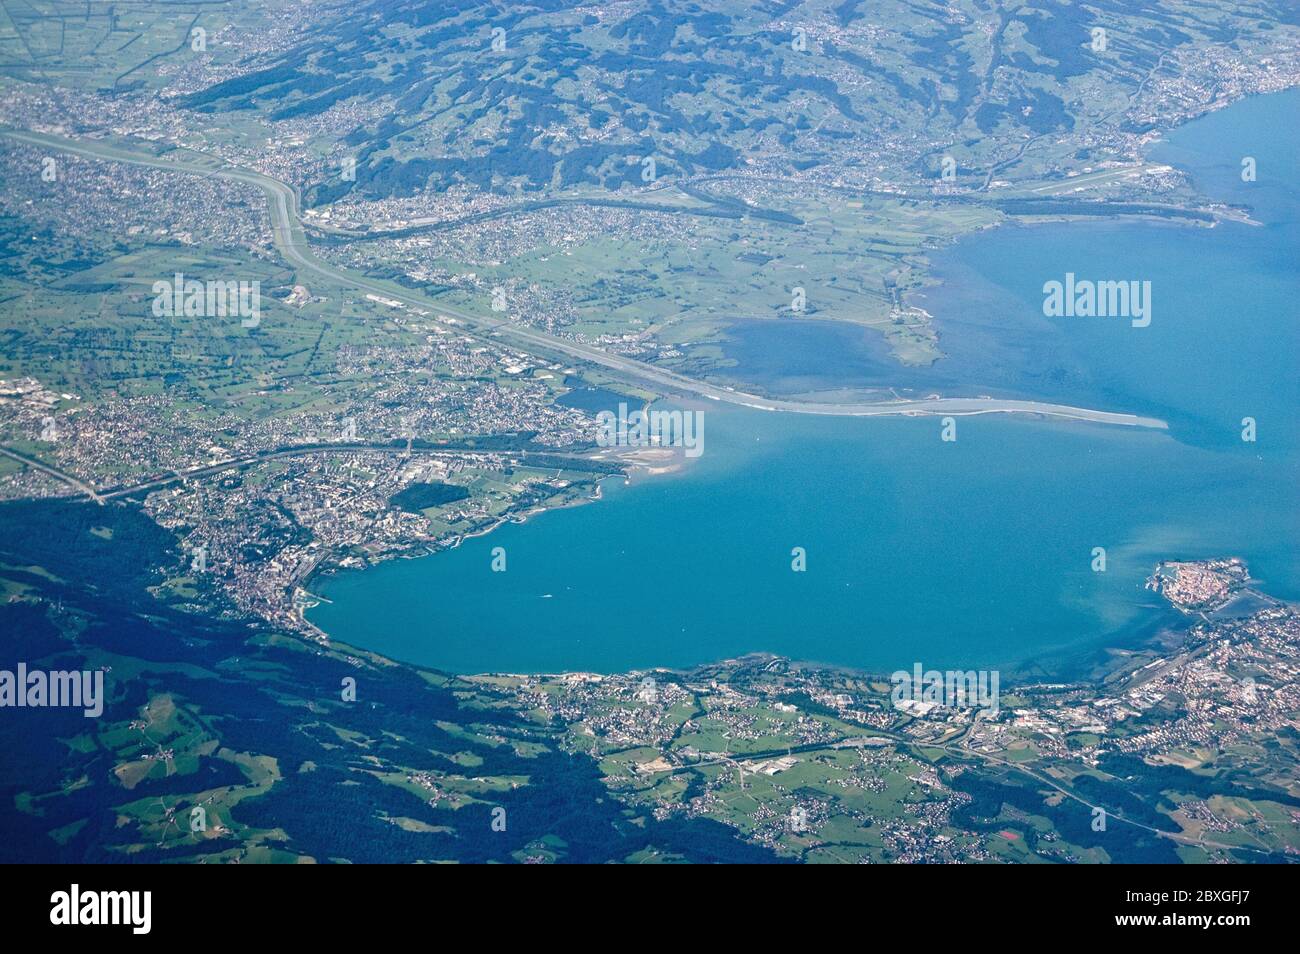 View from above of the south eastern corner of Lake Constance on the border of Germany and Austria. Lindau Bodensee is on the right hand side. To the Stock Photo